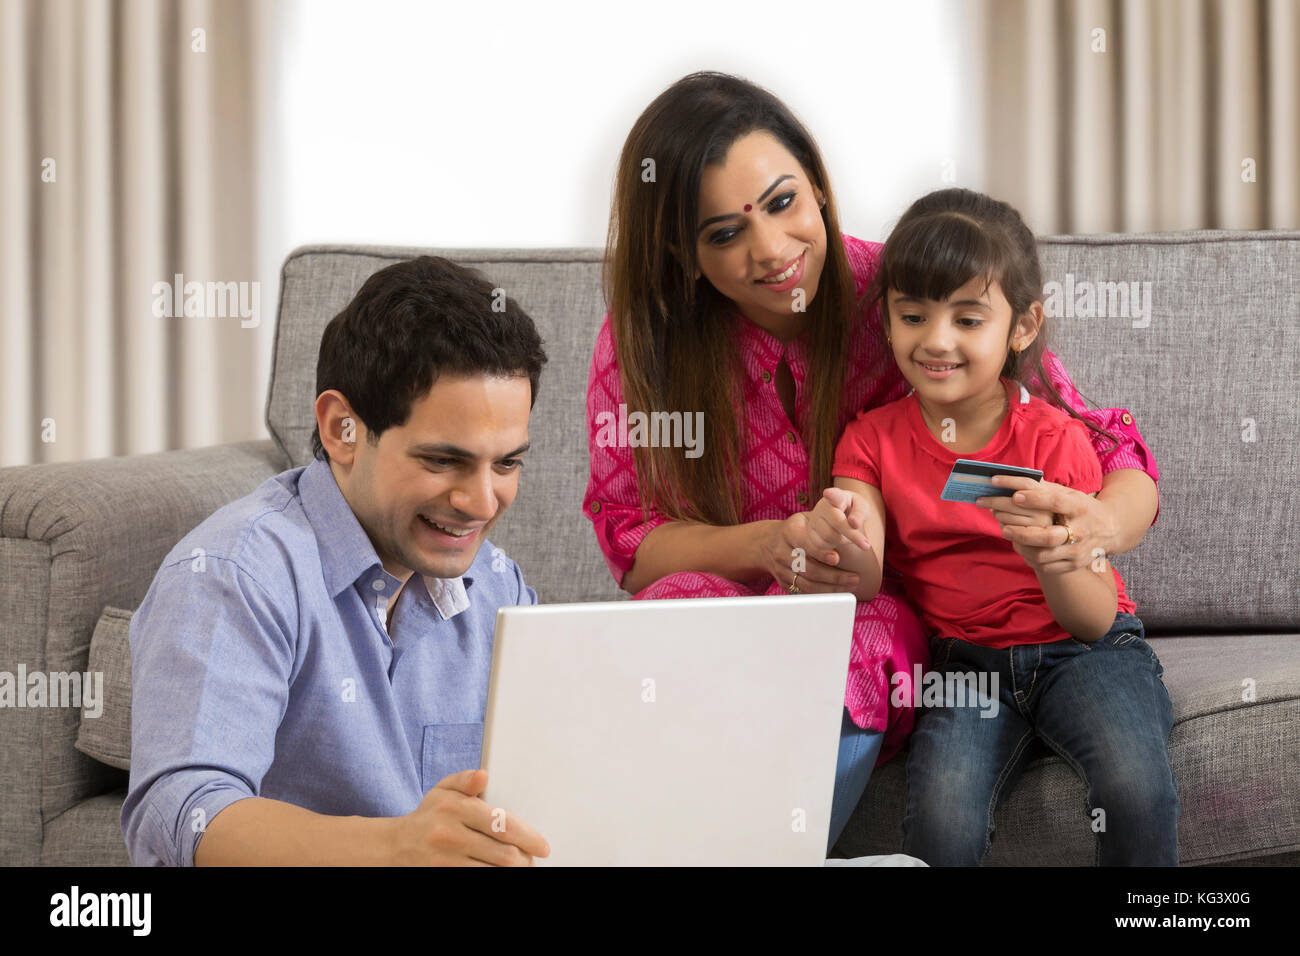 Family shopping online Banque D'Images